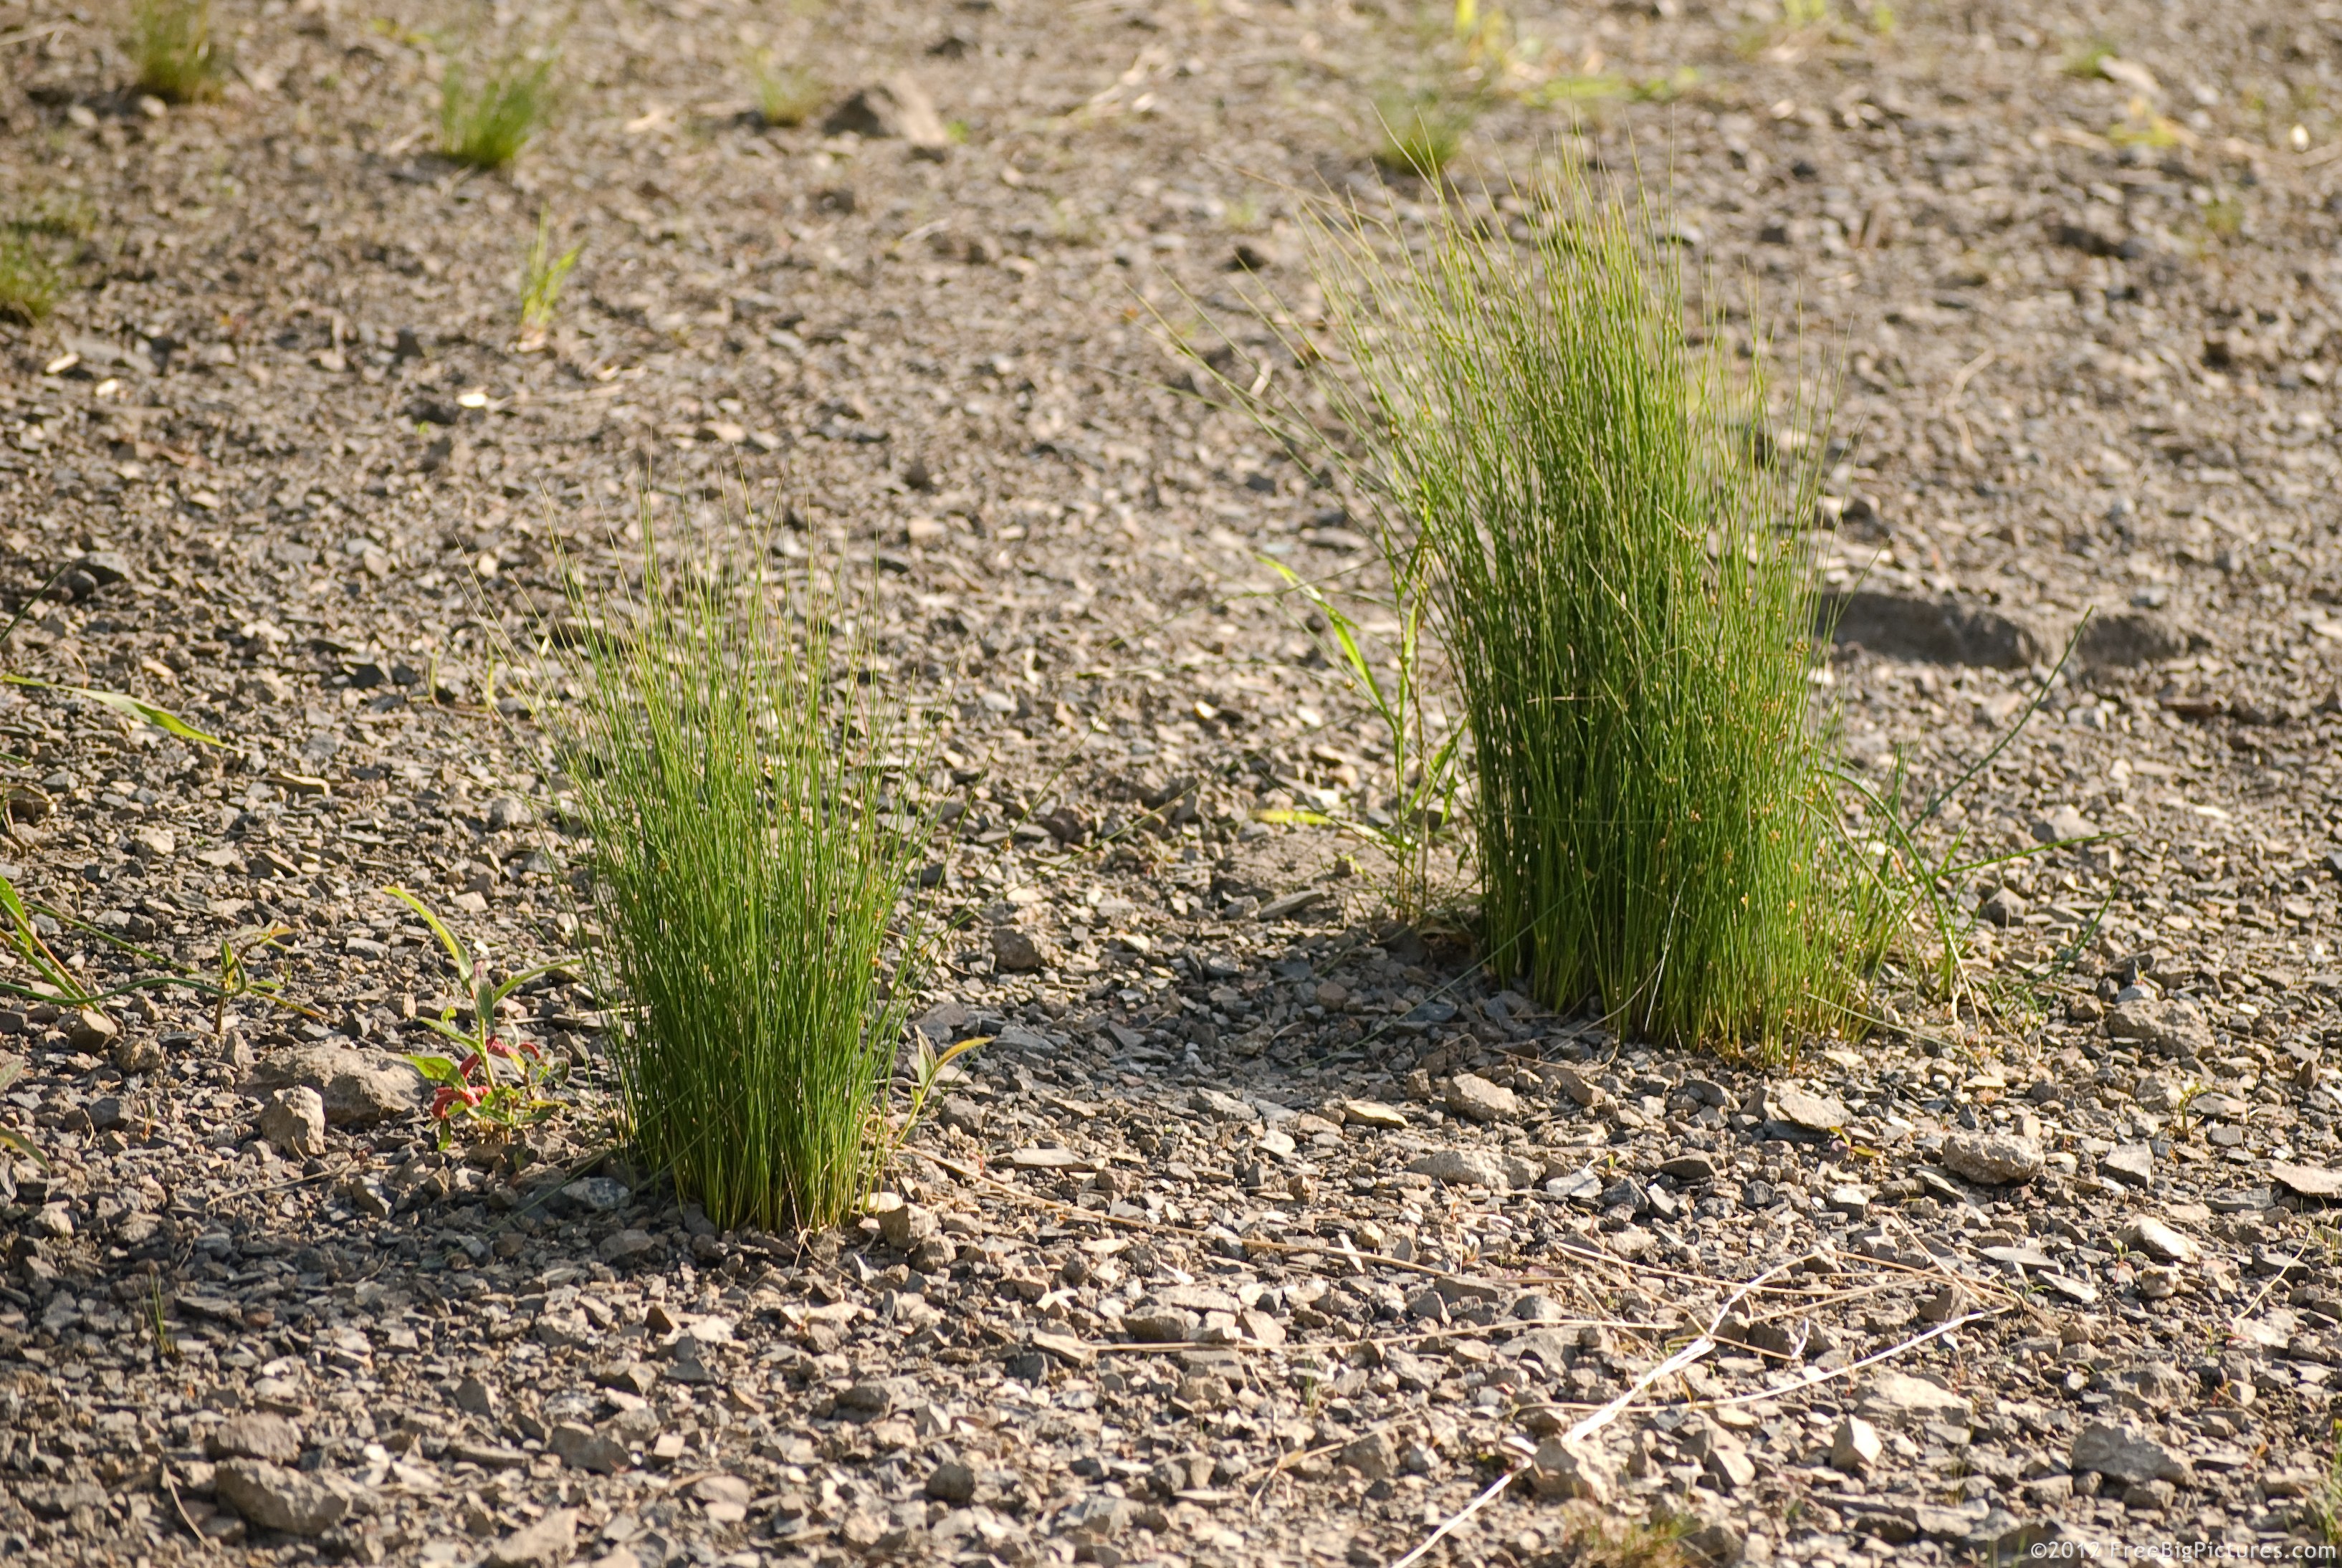 A dried lake edge with grass and rocks